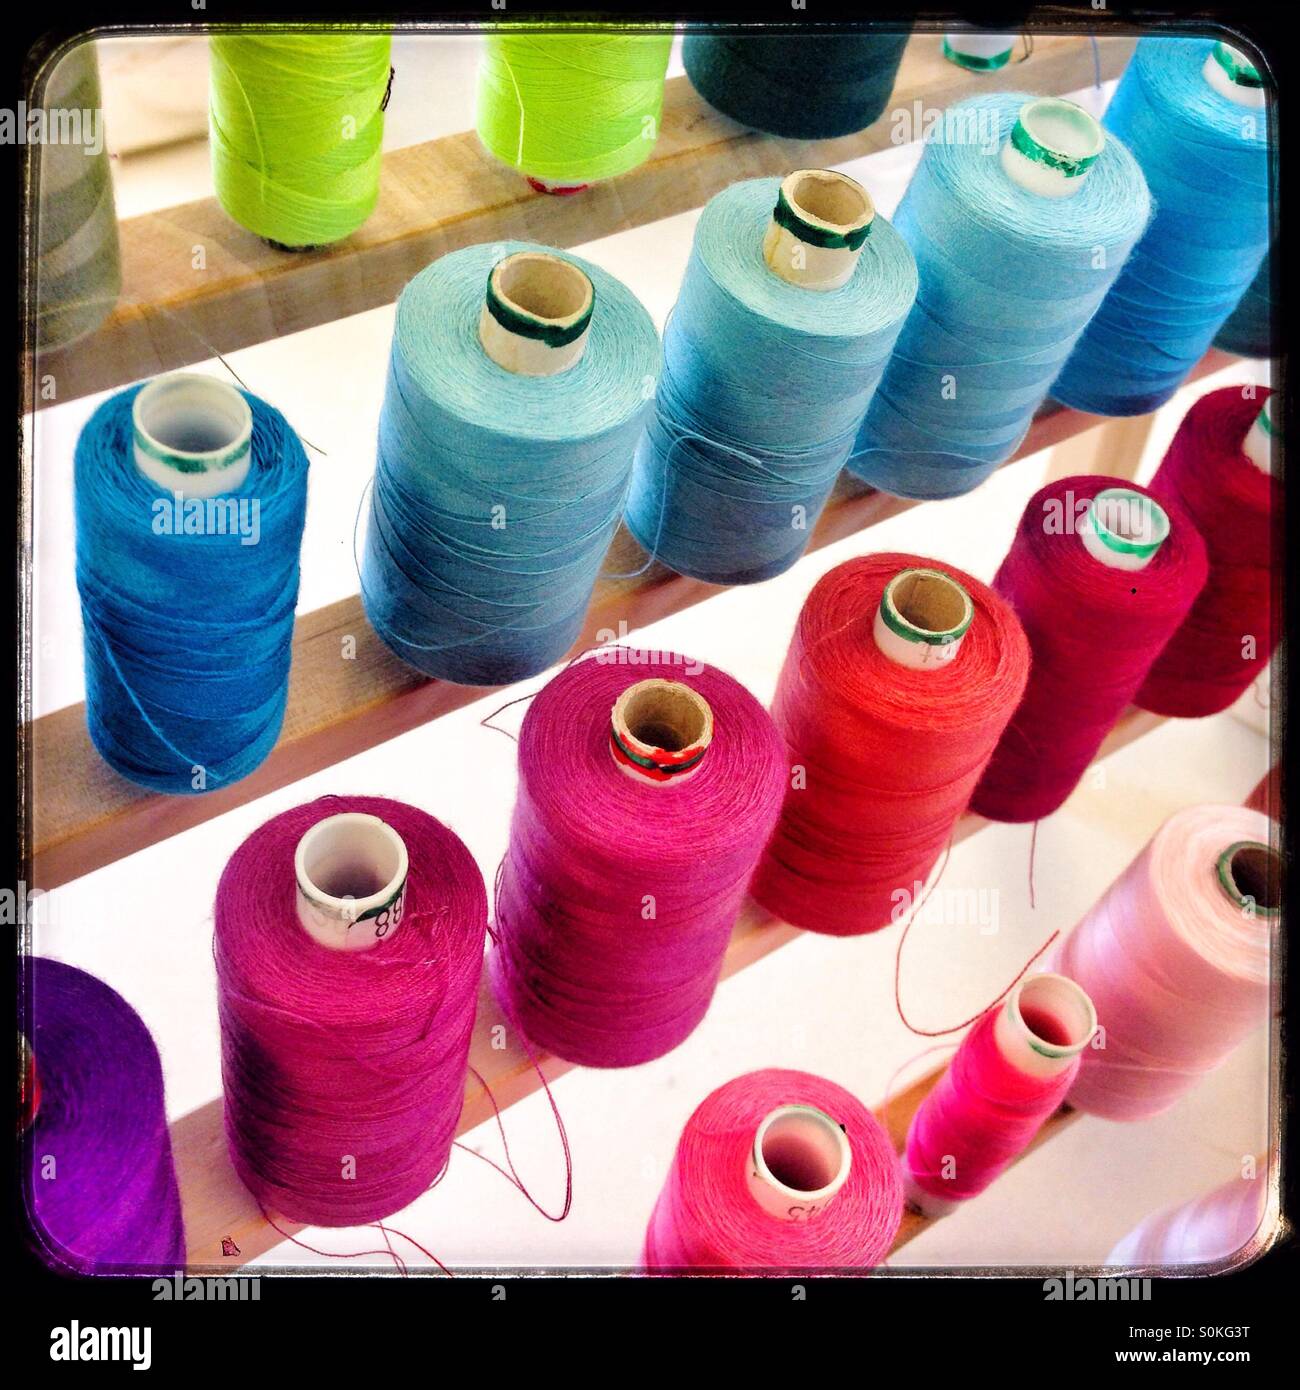 Sewing Cotton threads on reels. Stock Photo